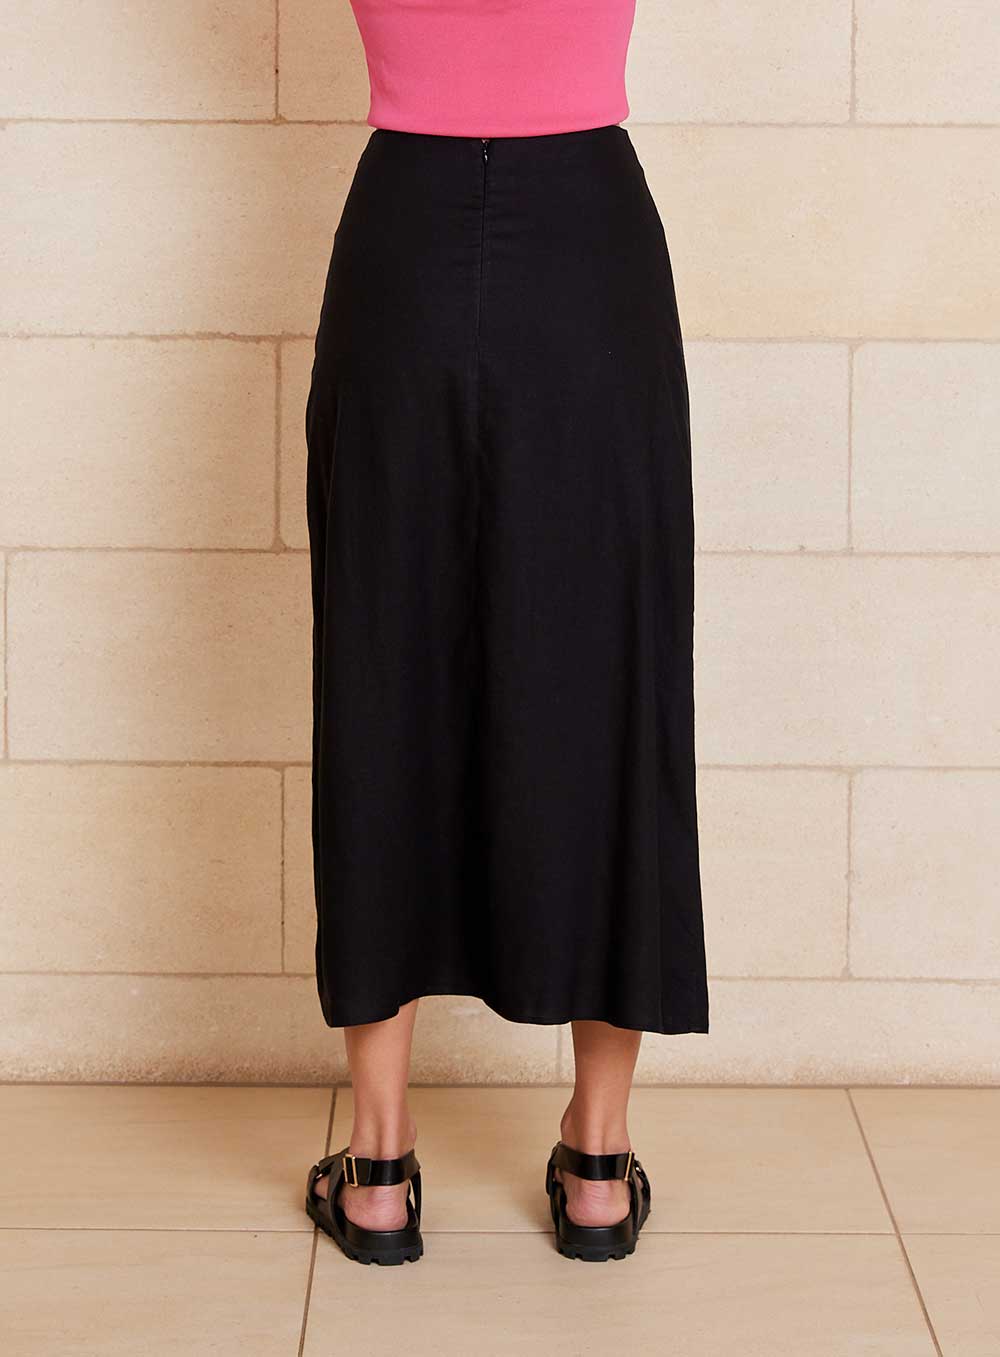 The Lily Skirt in black features a ruched split detailing that adds both shape and texture, functional ruching with tie leg splits and invisible zip back seam.